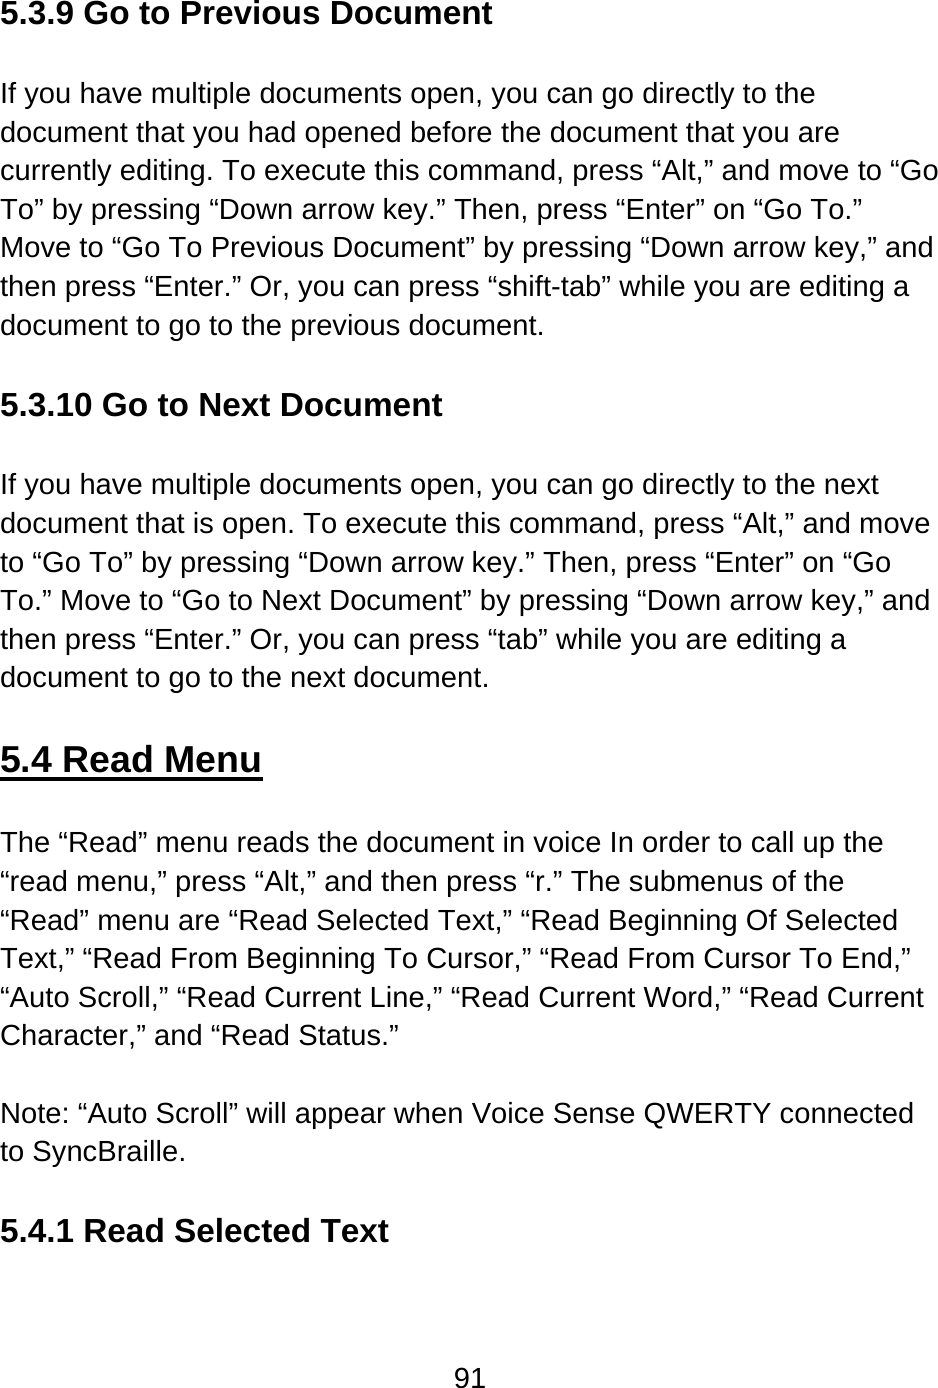 91   5.3.9 Go to Previous Document  If you have multiple documents open, you can go directly to the document that you had opened before the document that you are currently editing. To execute this command, press “Alt,” and move to “Go To” by pressing “Down arrow key.” Then, press “Enter” on “Go To.”   Move to “Go To Previous Document” by pressing “Down arrow key,” and then press “Enter.” Or, you can press “shift-tab” while you are editing a document to go to the previous document.  5.3.10 Go to Next Document  If you have multiple documents open, you can go directly to the next document that is open. To execute this command, press “Alt,” and move to “Go To” by pressing “Down arrow key.” Then, press “Enter” on “Go To.” Move to “Go to Next Document” by pressing “Down arrow key,” and then press “Enter.” Or, you can press “tab” while you are editing a document to go to the next document.  5.4 Read Menu  The “Read” menu reads the document in voice In order to call up the “read menu,” press “Alt,” and then press “r.” The submenus of the “Read” menu are “Read Selected Text,” “Read Beginning Of Selected Text,” “Read From Beginning To Cursor,” “Read From Cursor To End,” “Auto Scroll,” “Read Current Line,” “Read Current Word,” “Read Current Character,” and “Read Status.”  Note: “Auto Scroll” will appear when Voice Sense QWERTY connected to SyncBraille.  5.4.1 Read Selected Text  